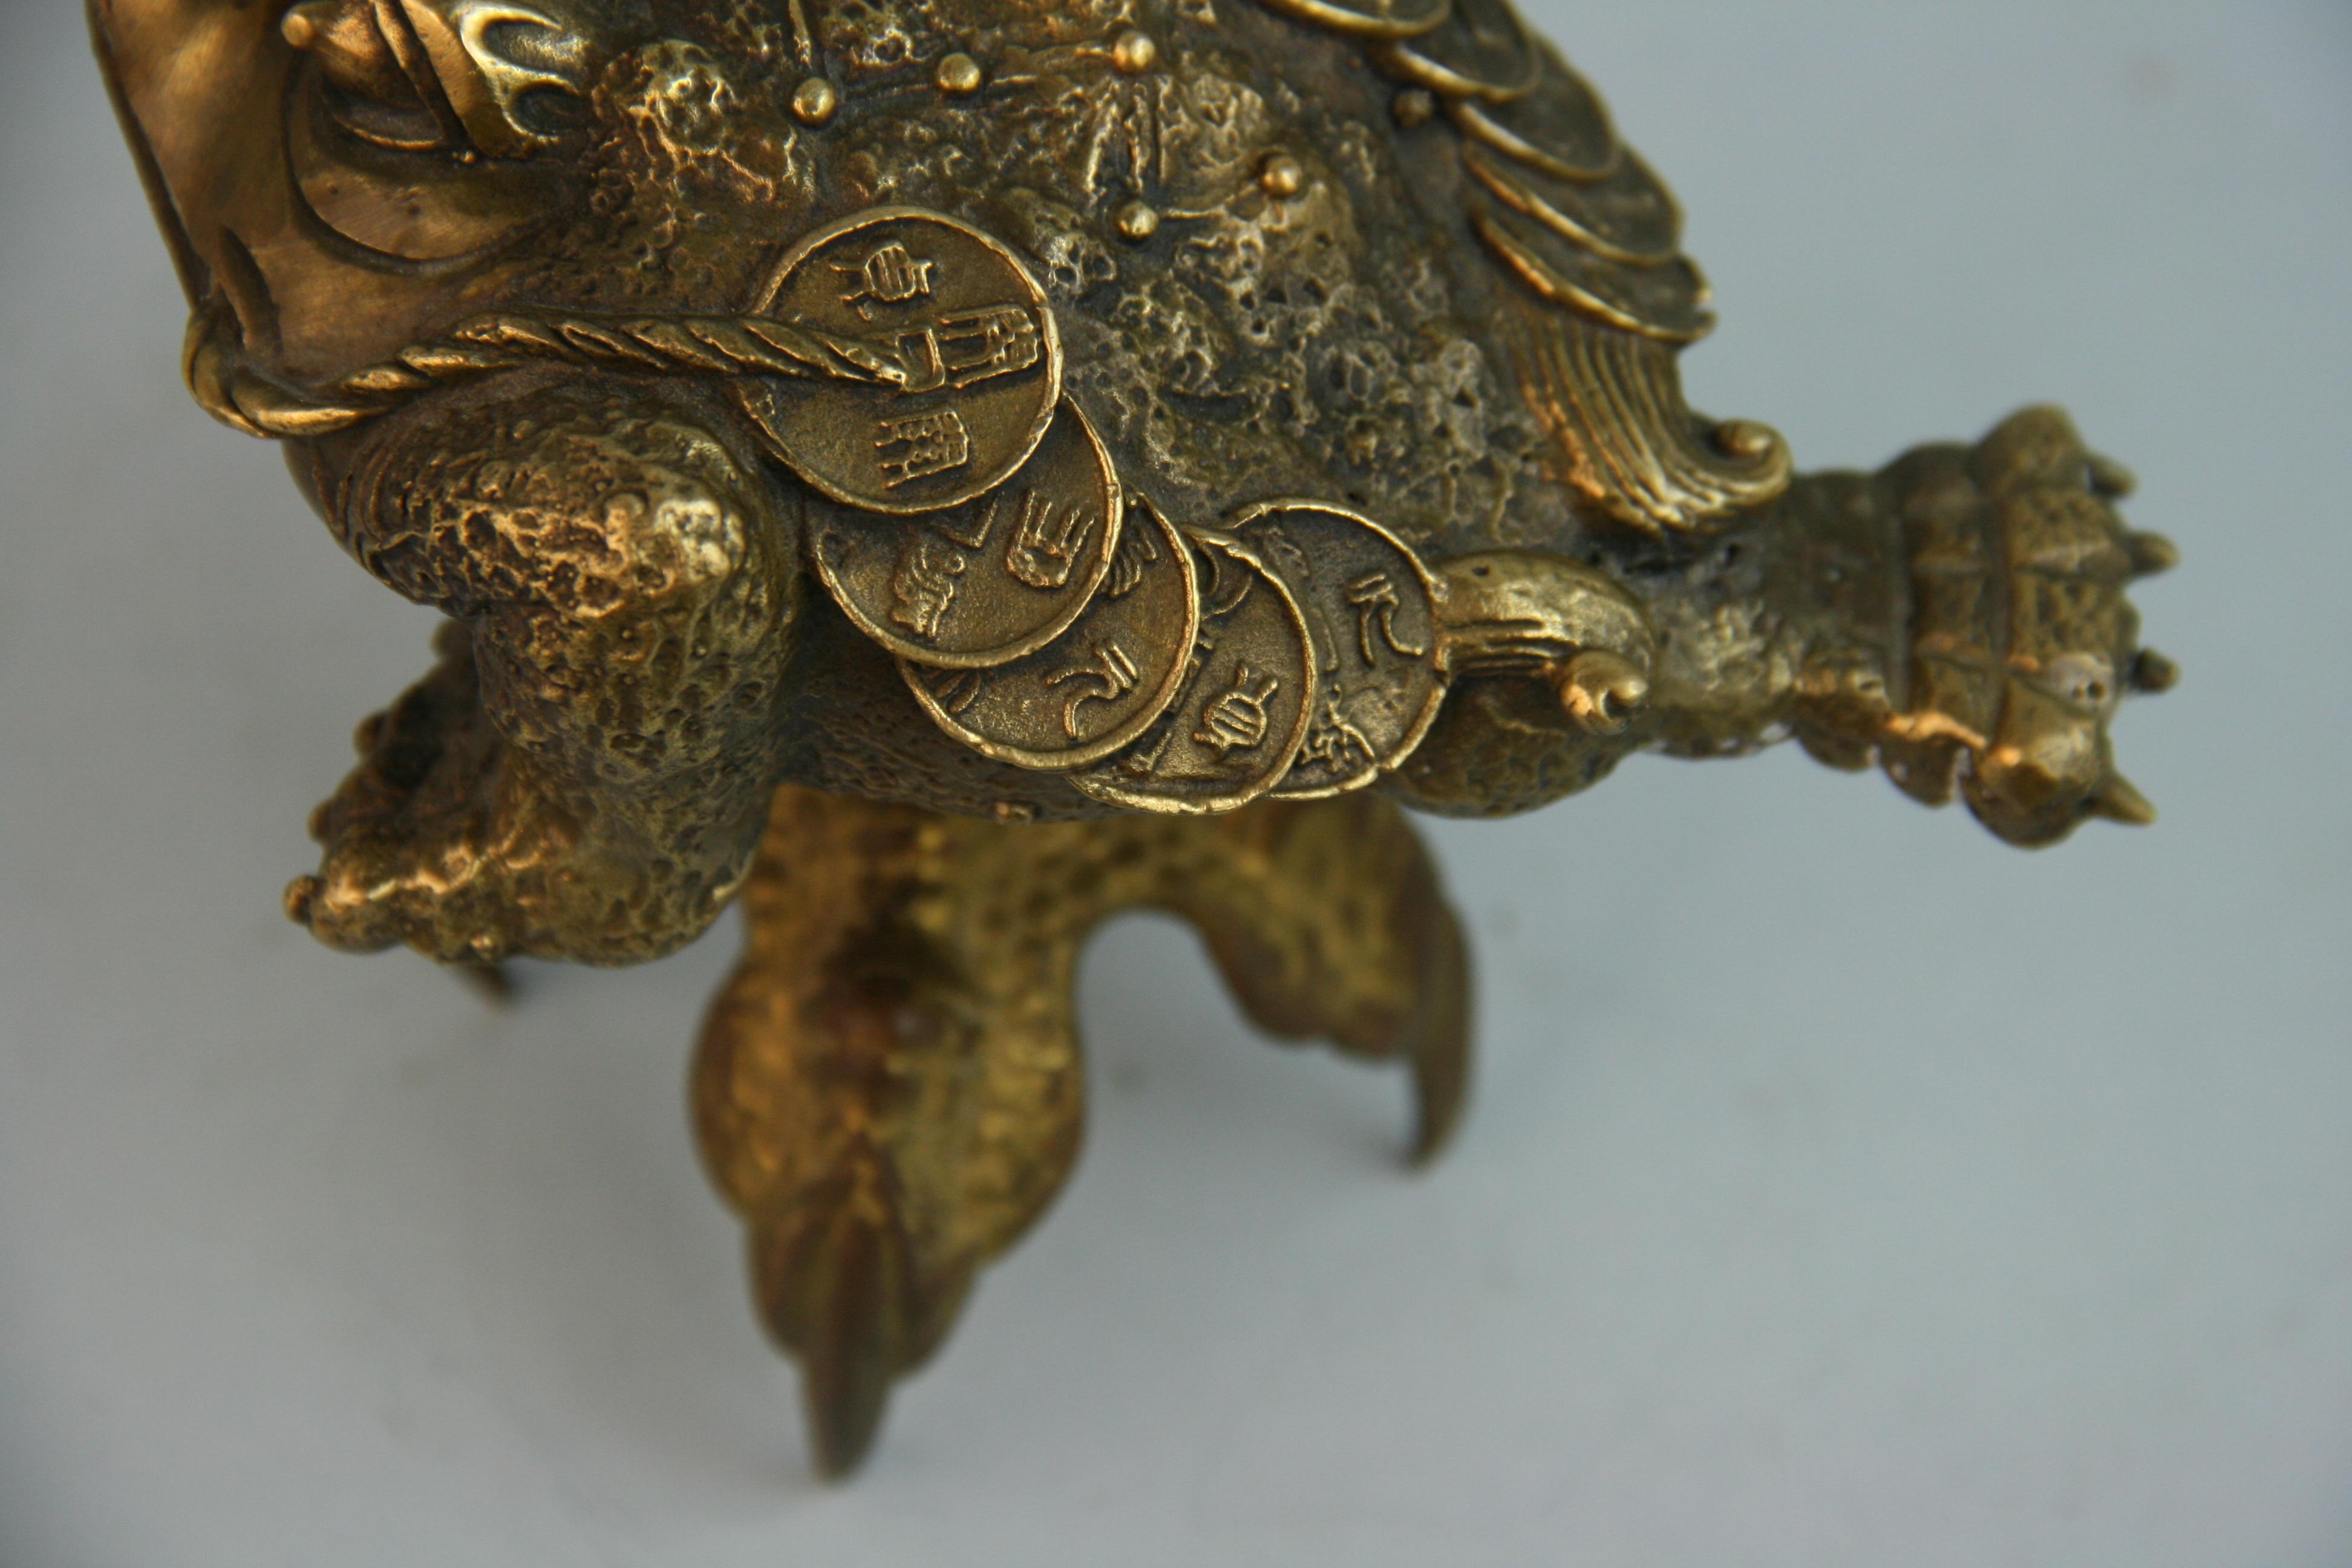 Mid-20th Century Japanese Jin Chan 'Money Frog' Cast Bronze Sculpture on a Stand